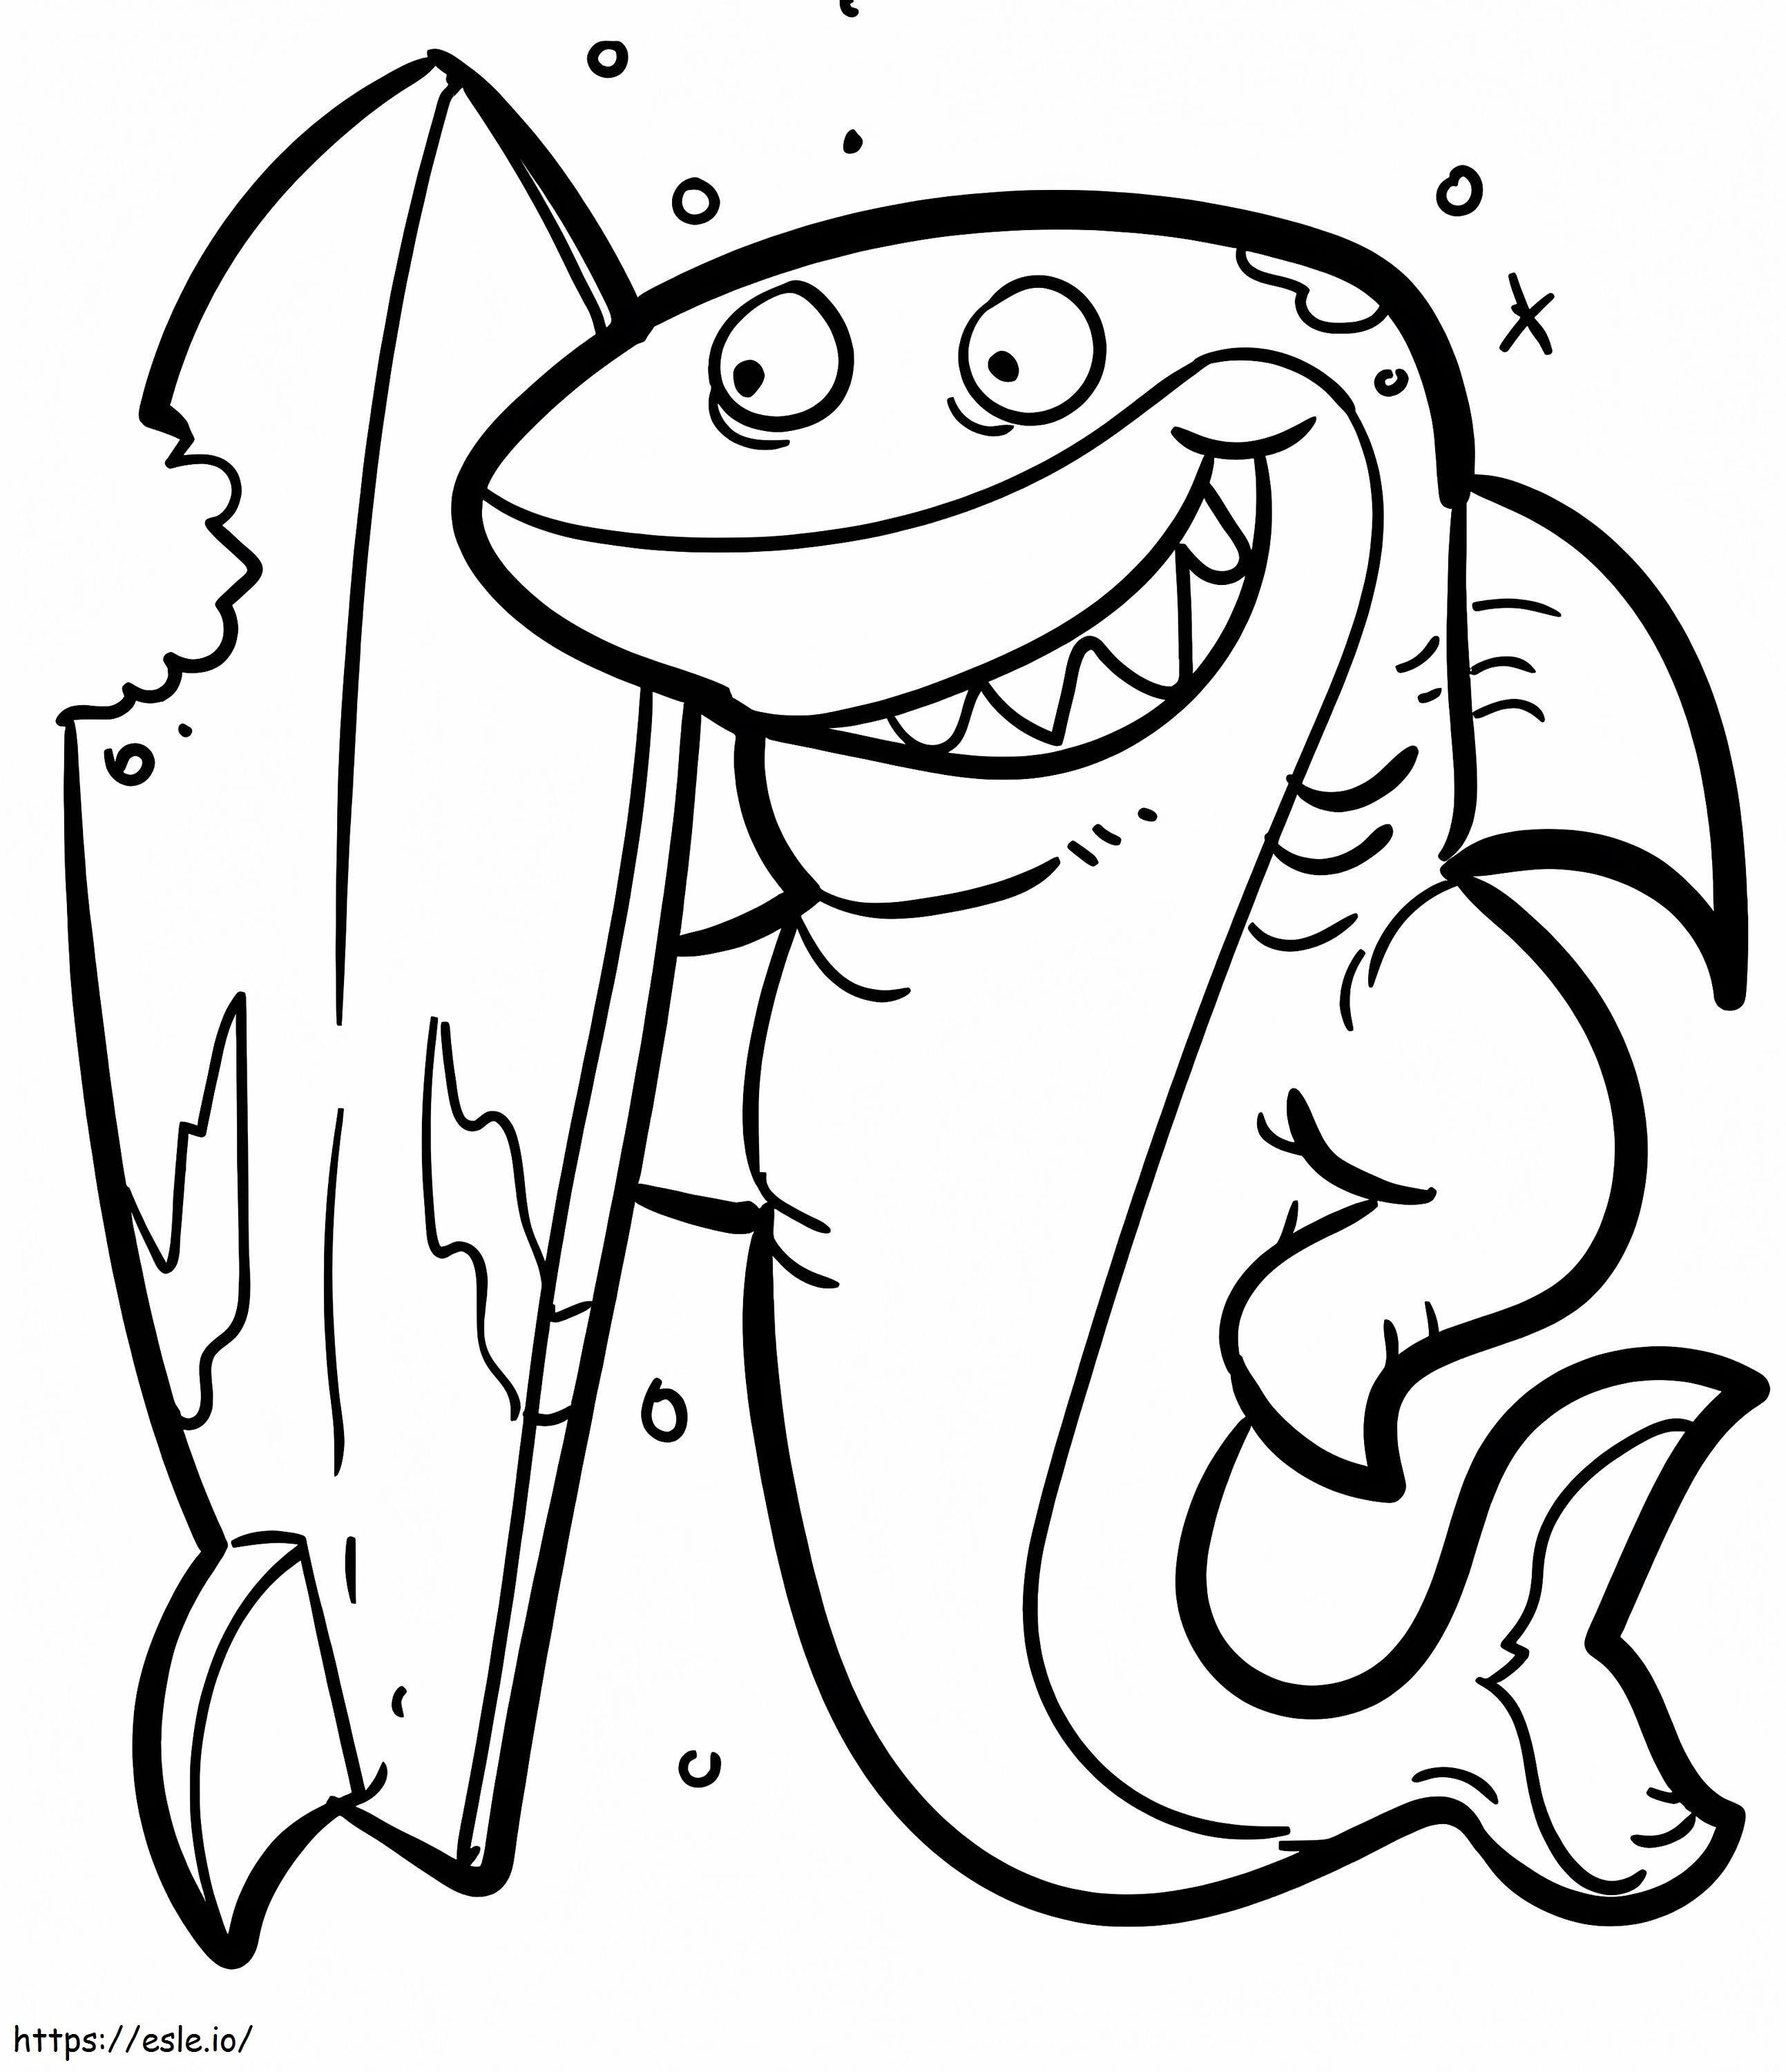 Shark With Surfboard coloring page